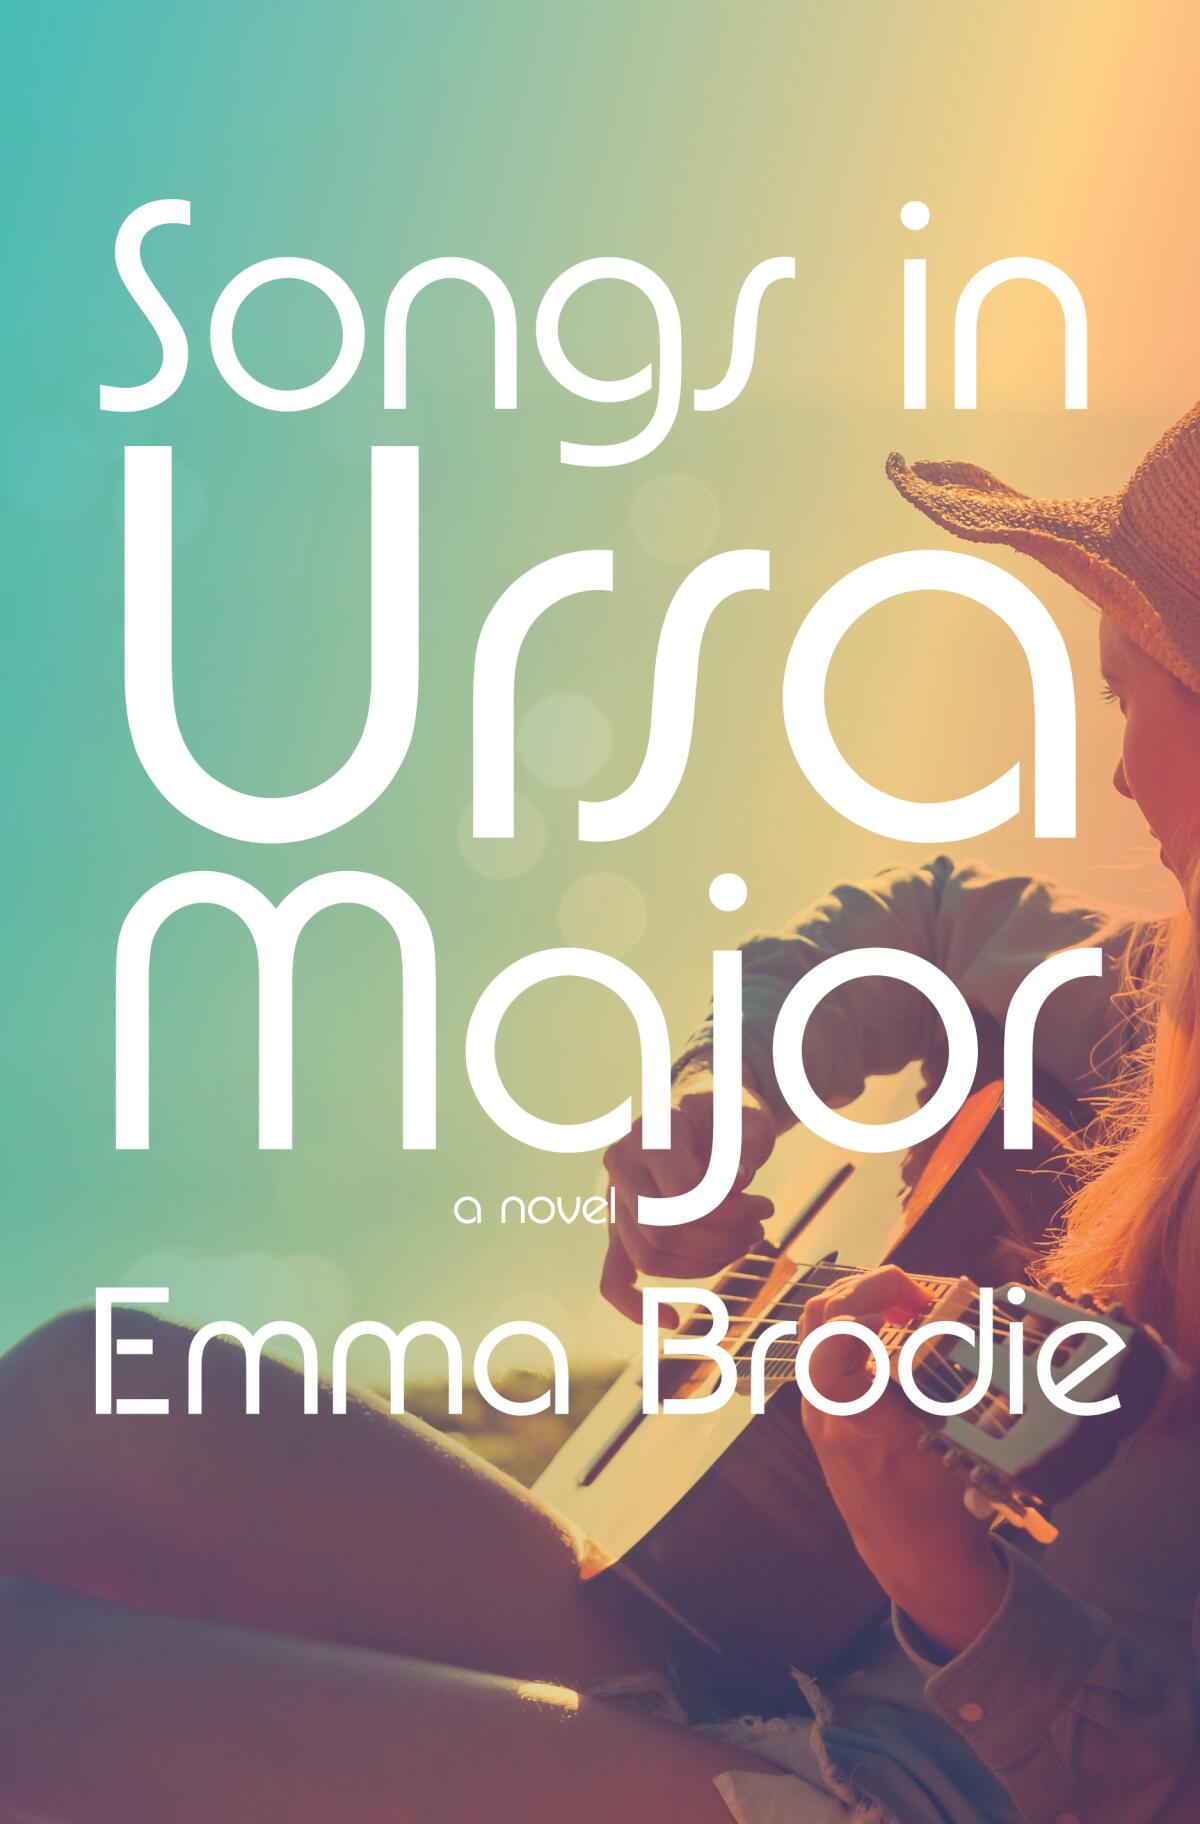 "Songs in Ursa Major," by Emma Brodie, fictionalizes the early days of Joni Mitchell's career.